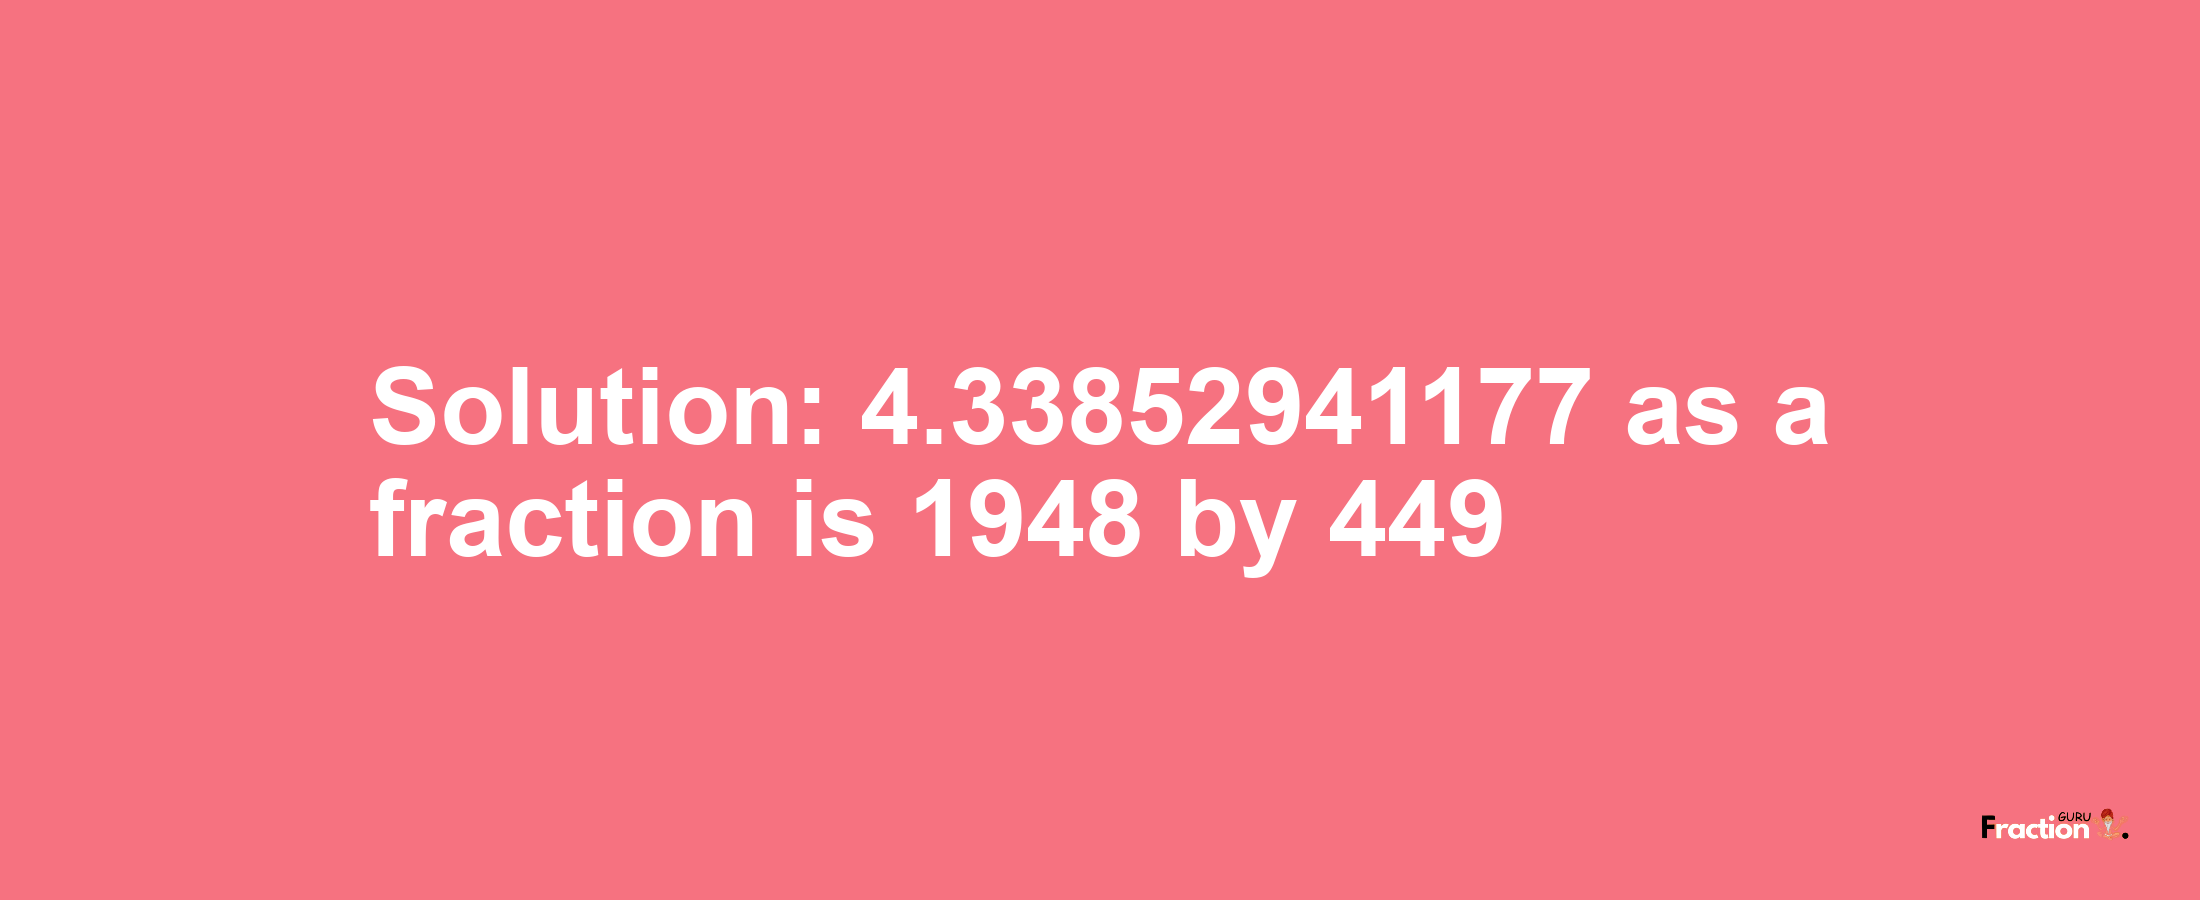 Solution:4.33852941177 as a fraction is 1948/449